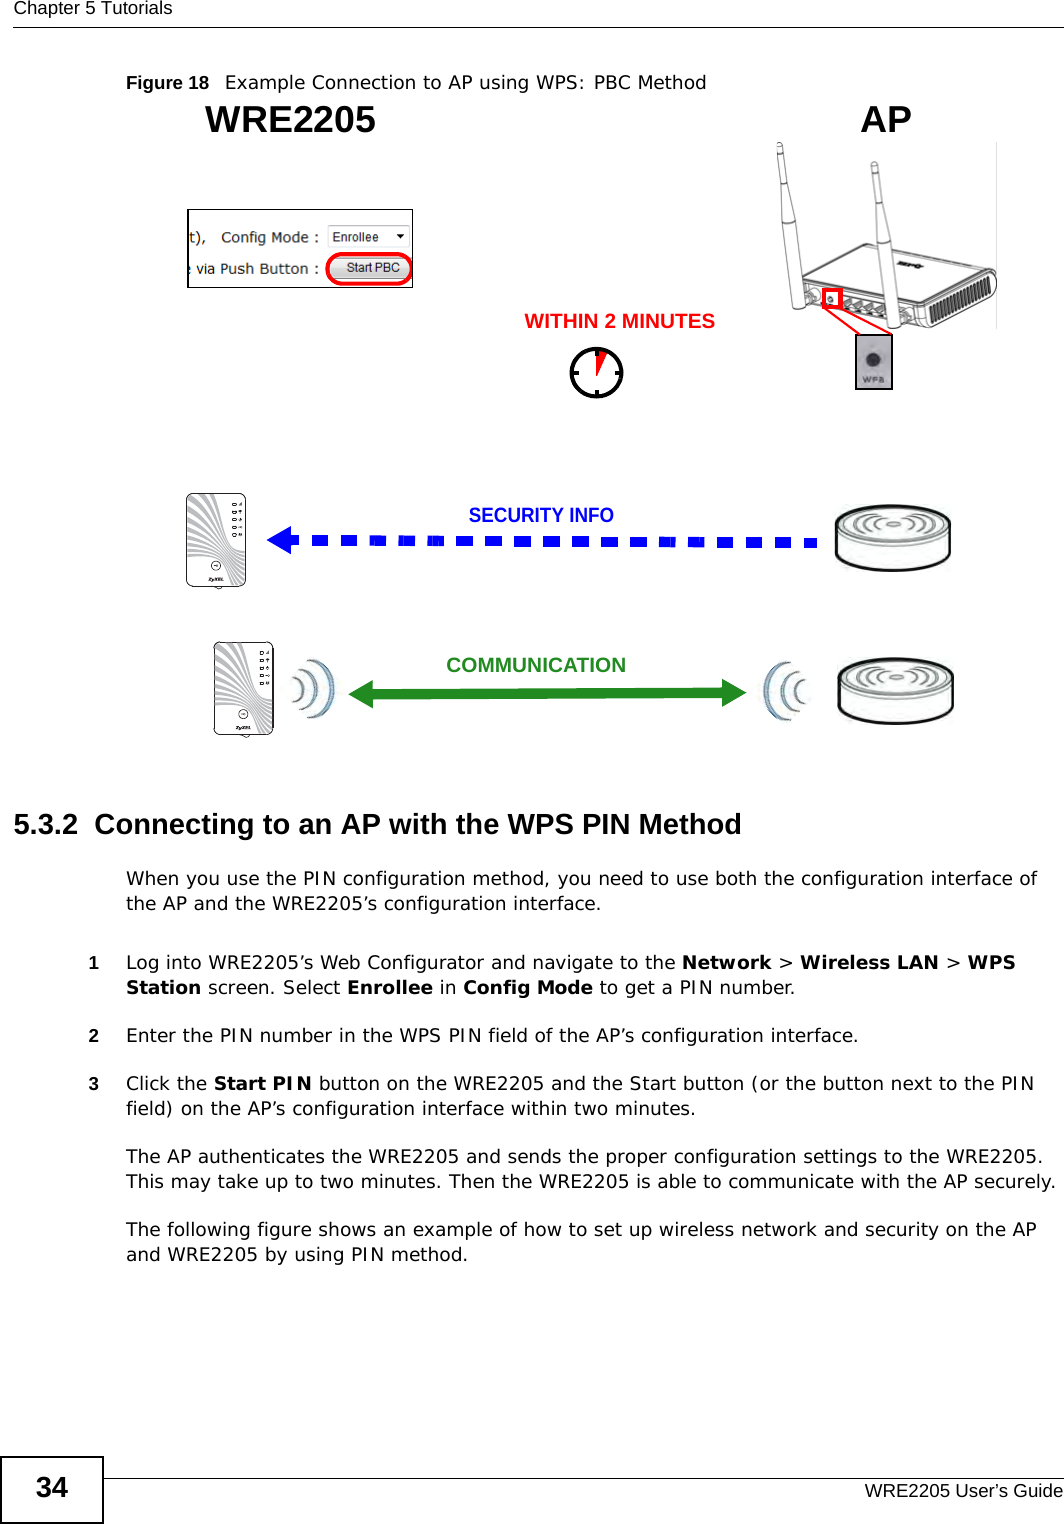 Chapter 5 TutorialsWRE2205 User’s Guide34Figure 18   Example Connection to AP using WPS: PBC Method5.3.2  Connecting to an AP with the WPS PIN MethodWhen you use the PIN configuration method, you need to use both the configuration interface of the AP and the WRE2205’s configuration interface.1Log into WRE2205’s Web Configurator and navigate to the Network &gt; Wireless LAN &gt; WPS Station screen. Select Enrollee in Config Mode to get a PIN number.2Enter the PIN number in the WPS PIN field of the AP’s configuration interface.3Click the Start PIN button on the WRE2205 and the Start button (or the button next to the PIN field) on the AP’s configuration interface within two minutes.The AP authenticates the WRE2205 and sends the proper configuration settings to the WRE2205. This may take up to two minutes. Then the WRE2205 is able to communicate with the AP securely. The following figure shows an example of how to set up wireless network and security on the AP and WRE2205 by using PIN method. WRE2205SECURITY INFOCOMMUNICATIONWITHIN 2 MINUTESAP